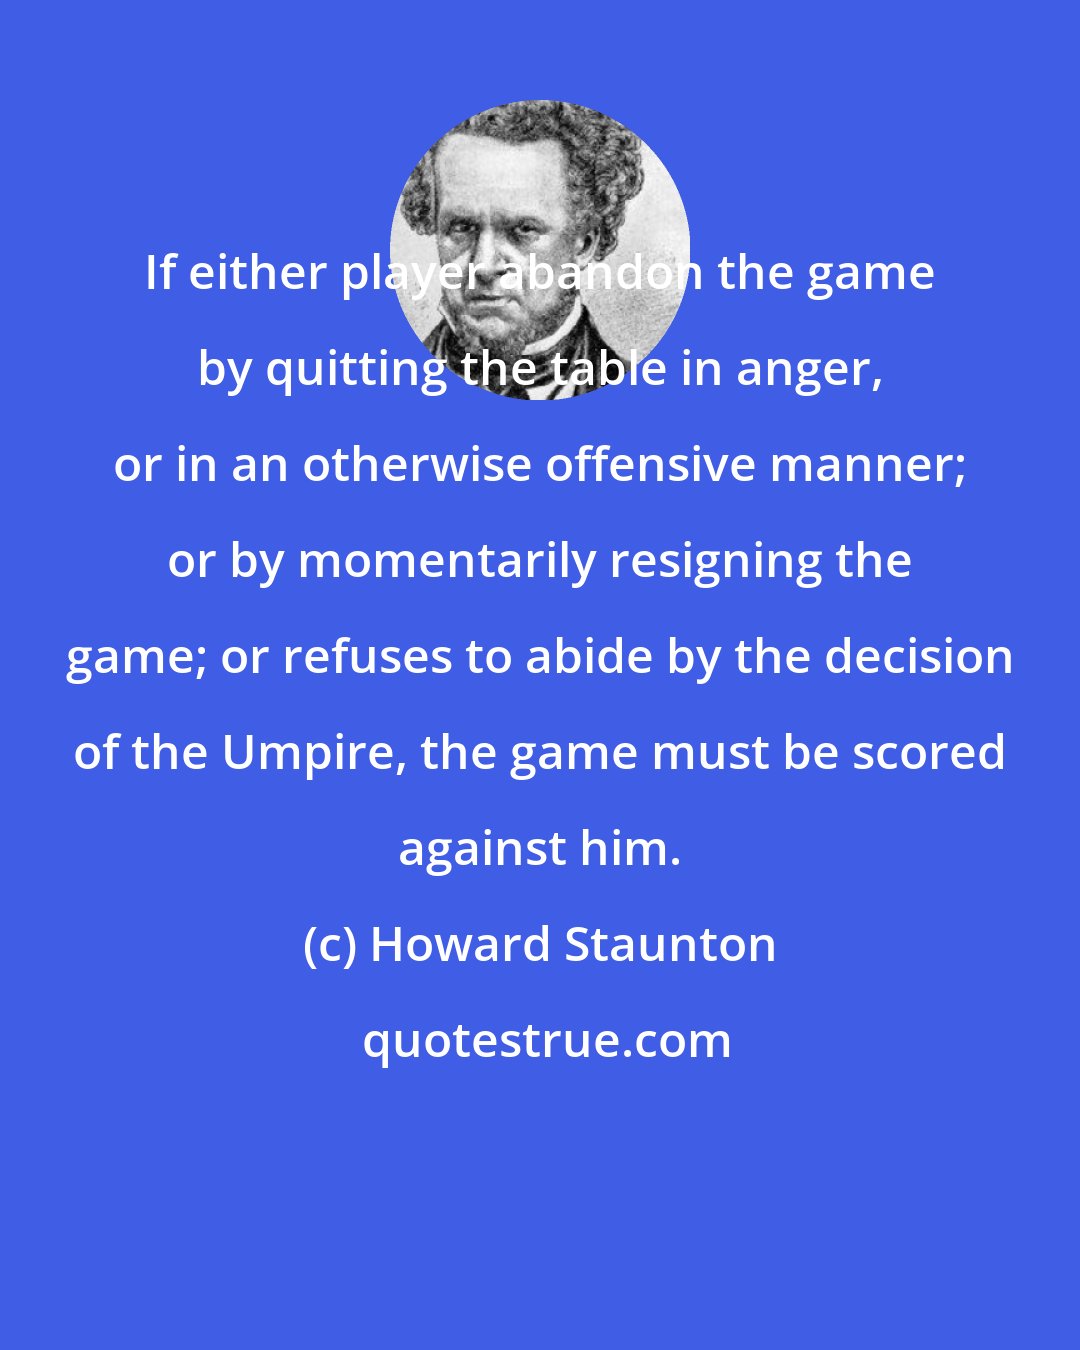 Howard Staunton: If either player abandon the game by quitting the table in anger, or in an otherwise offensive manner; or by momentarily resigning the game; or refuses to abide by the decision of the Umpire, the game must be scored against him.